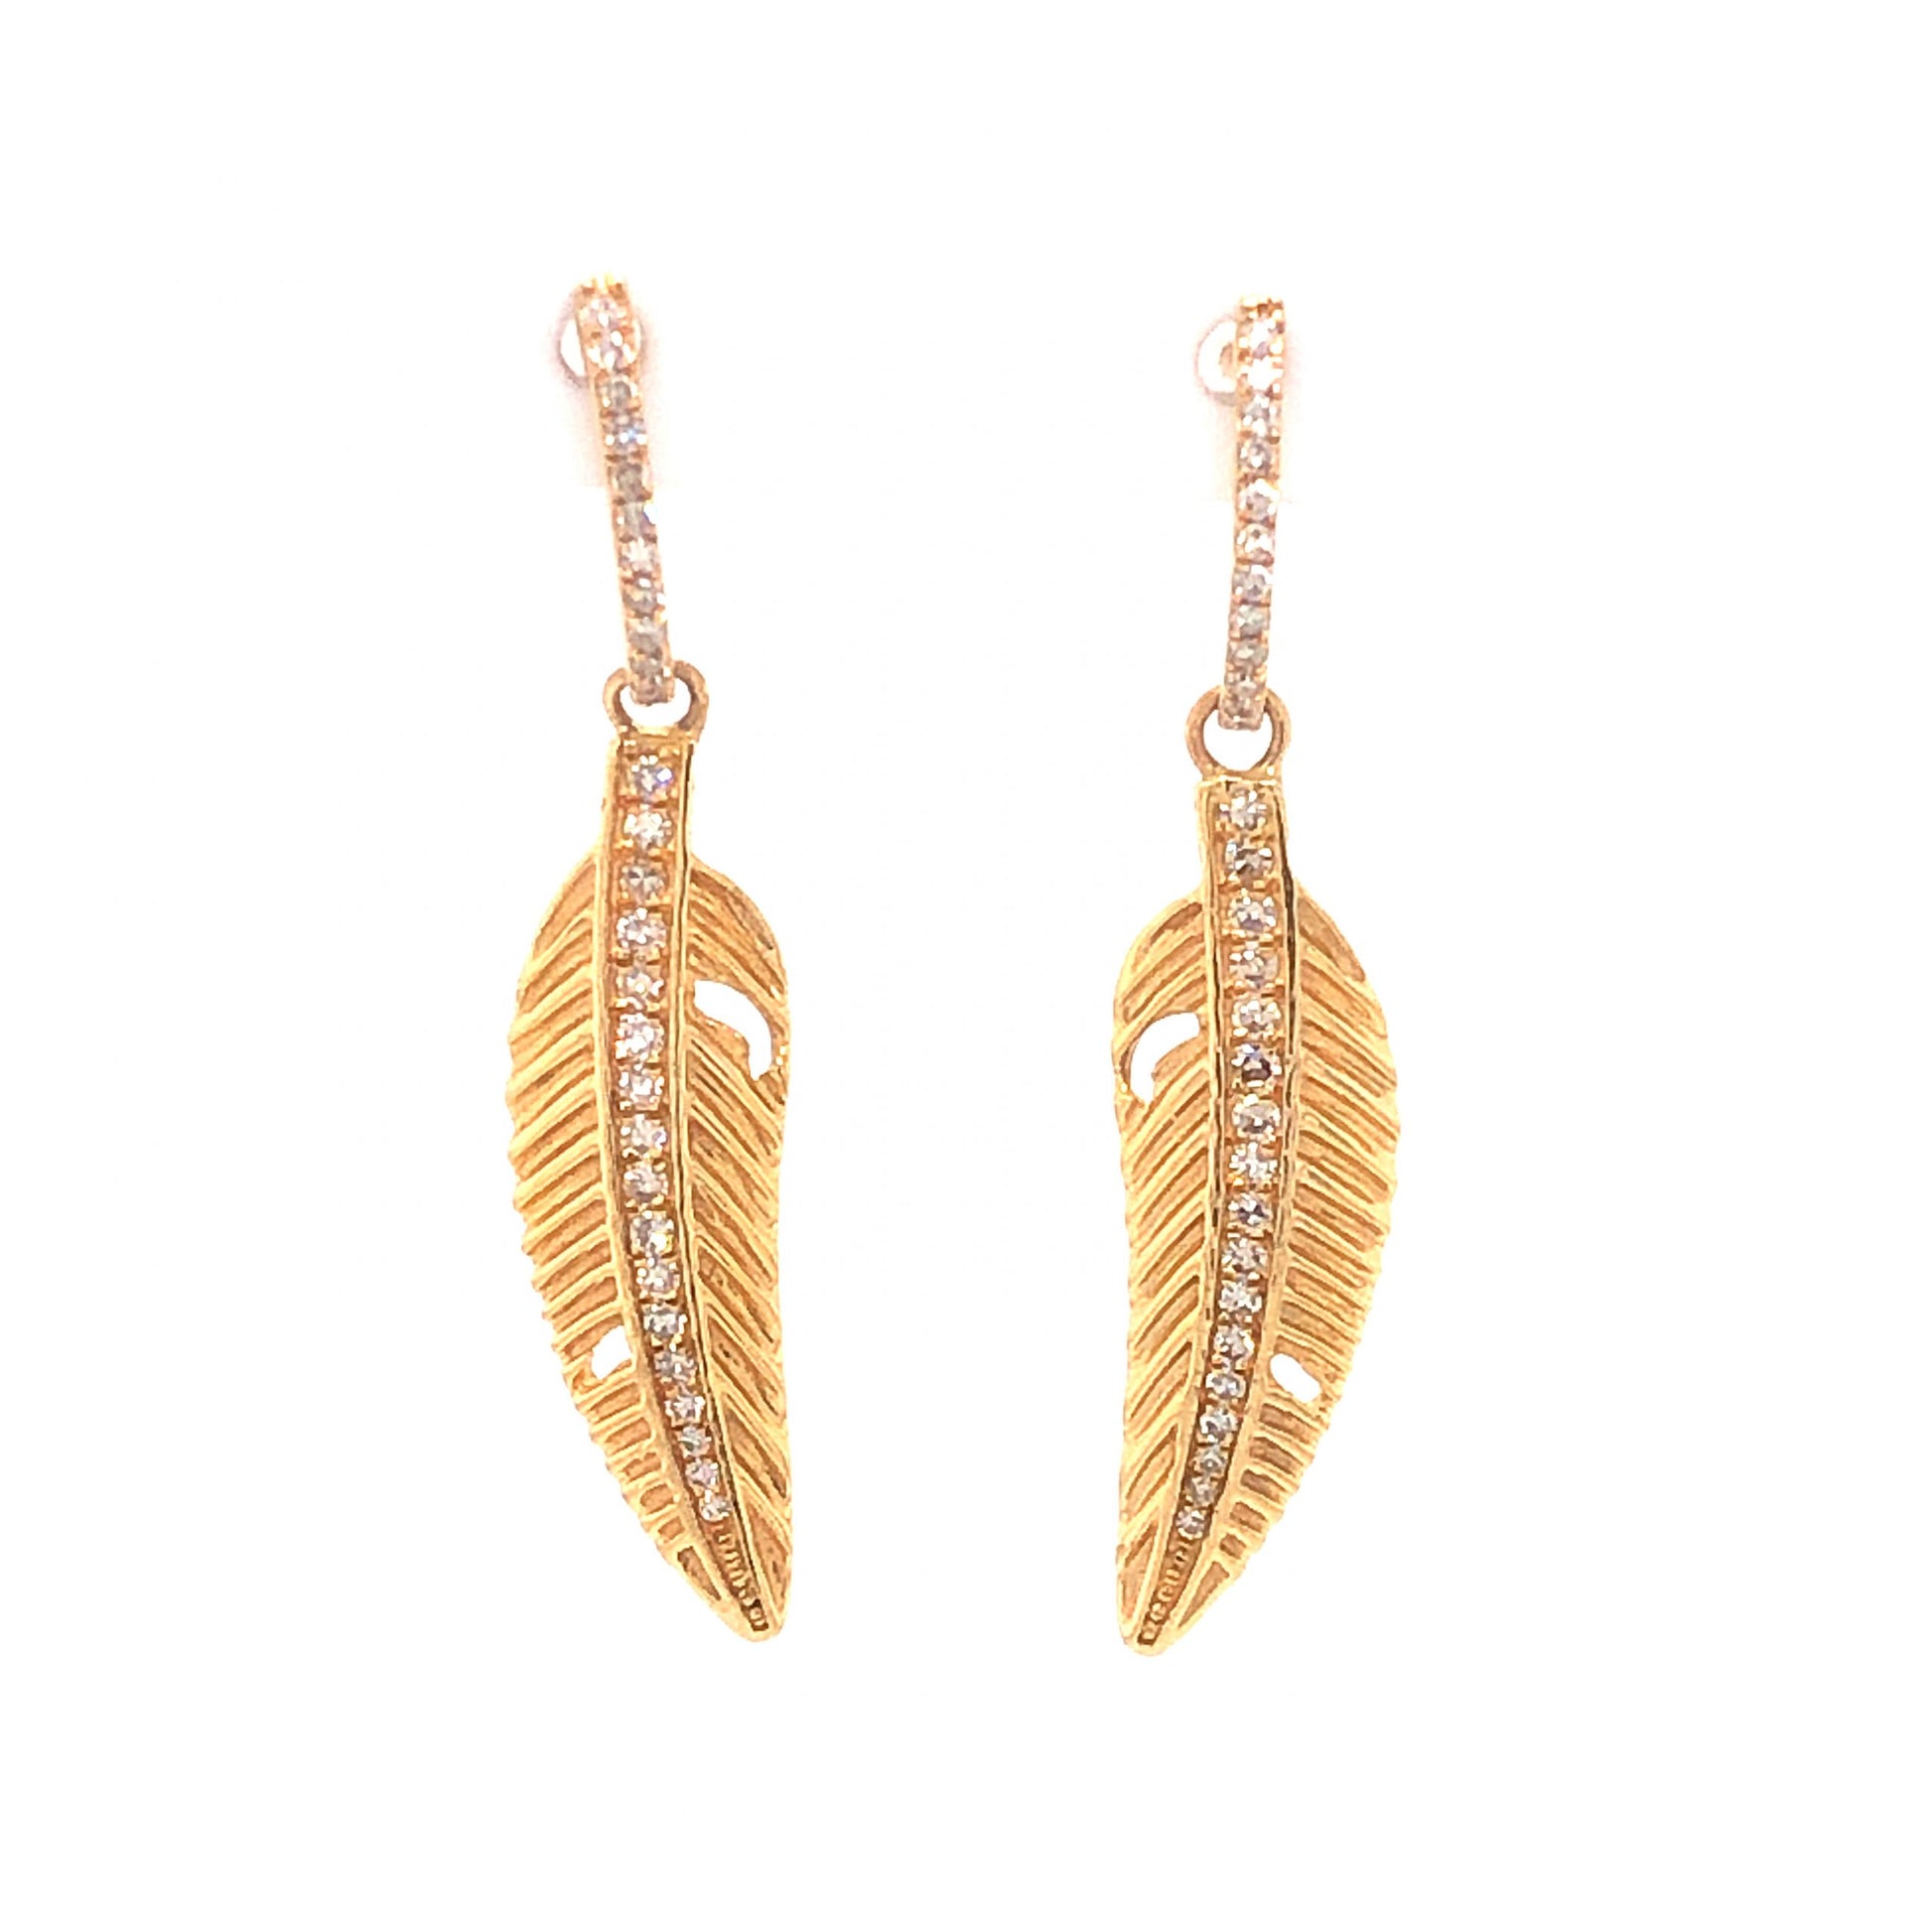 Diamond Leaf Drop Earrings in 14k Yellow GoldComposition: 14 Karat Yellow Gold Total Diamond Weight: .75ct Total Gram Weight: 4.1 g Inscription: 14k
      